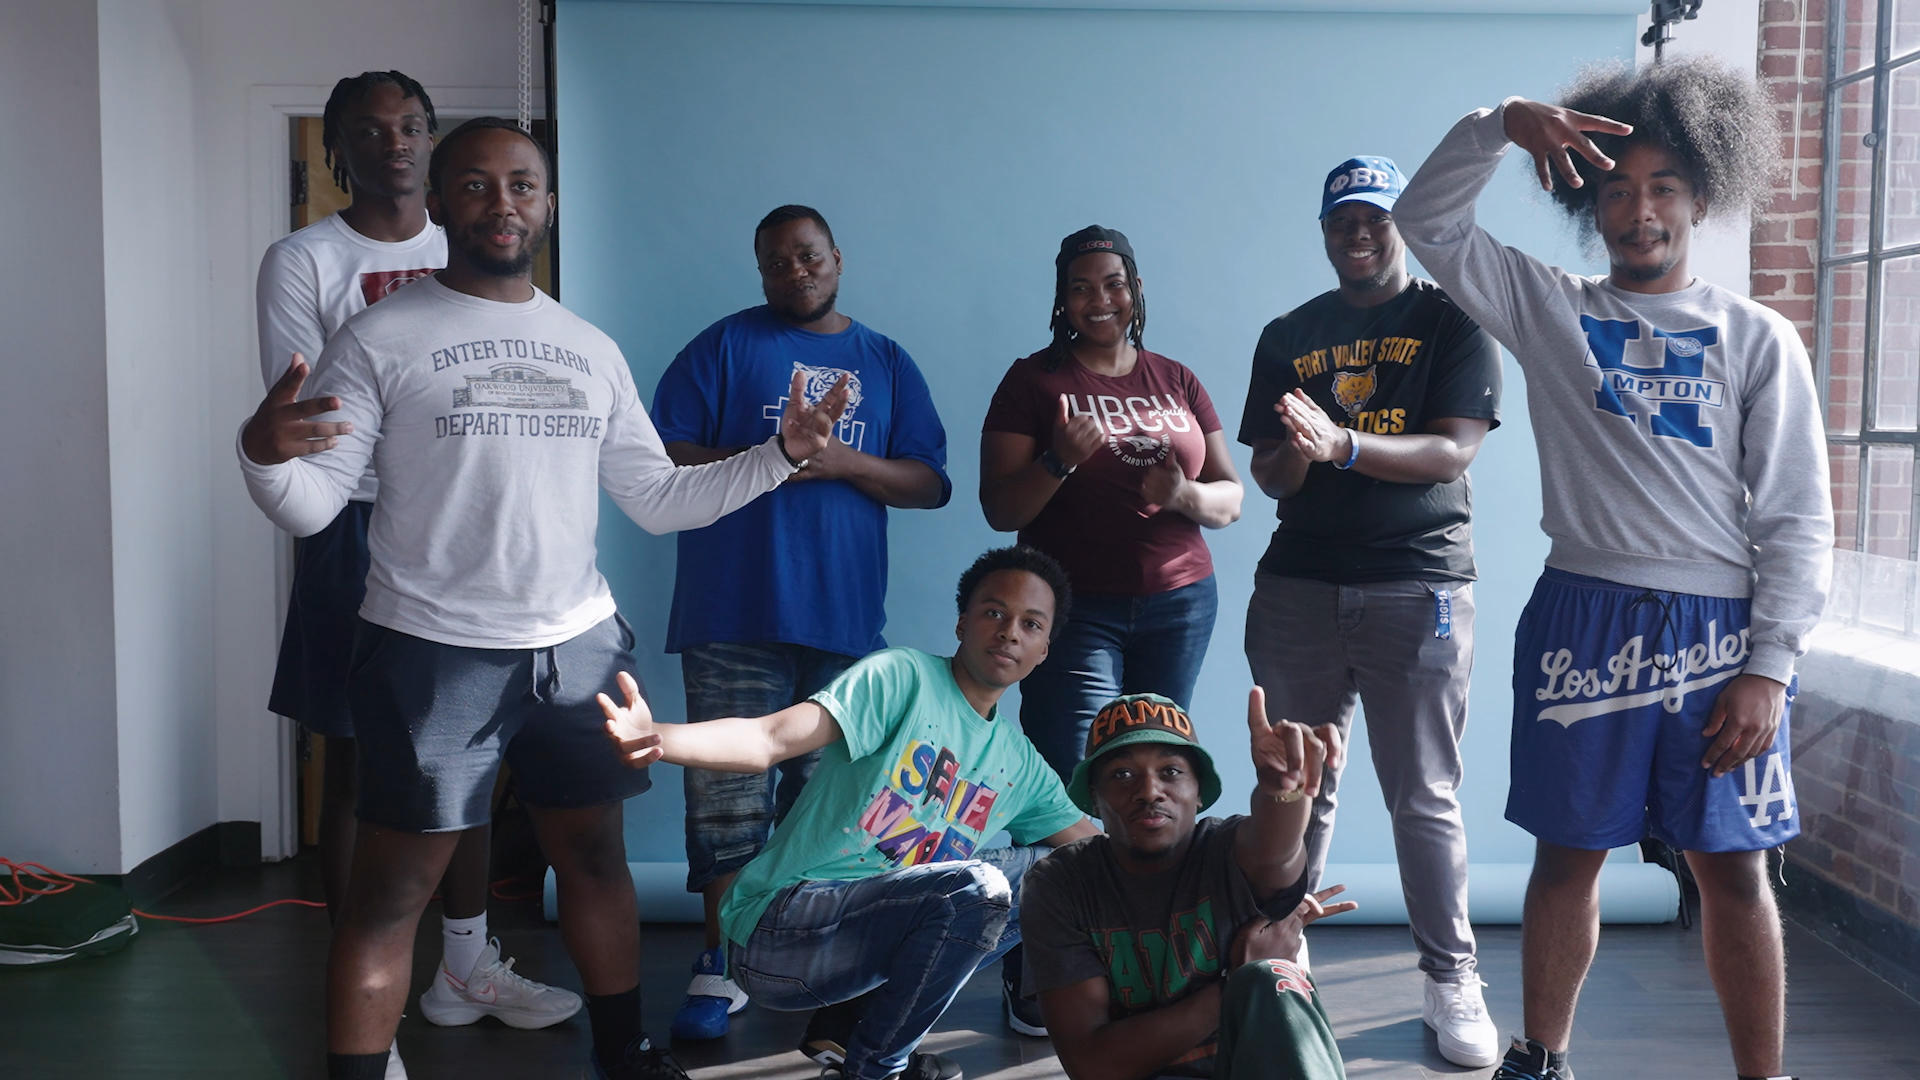 Xbox & Cxmmunity Team Up To Bless Over 50 HBCUs With Xbox Kits